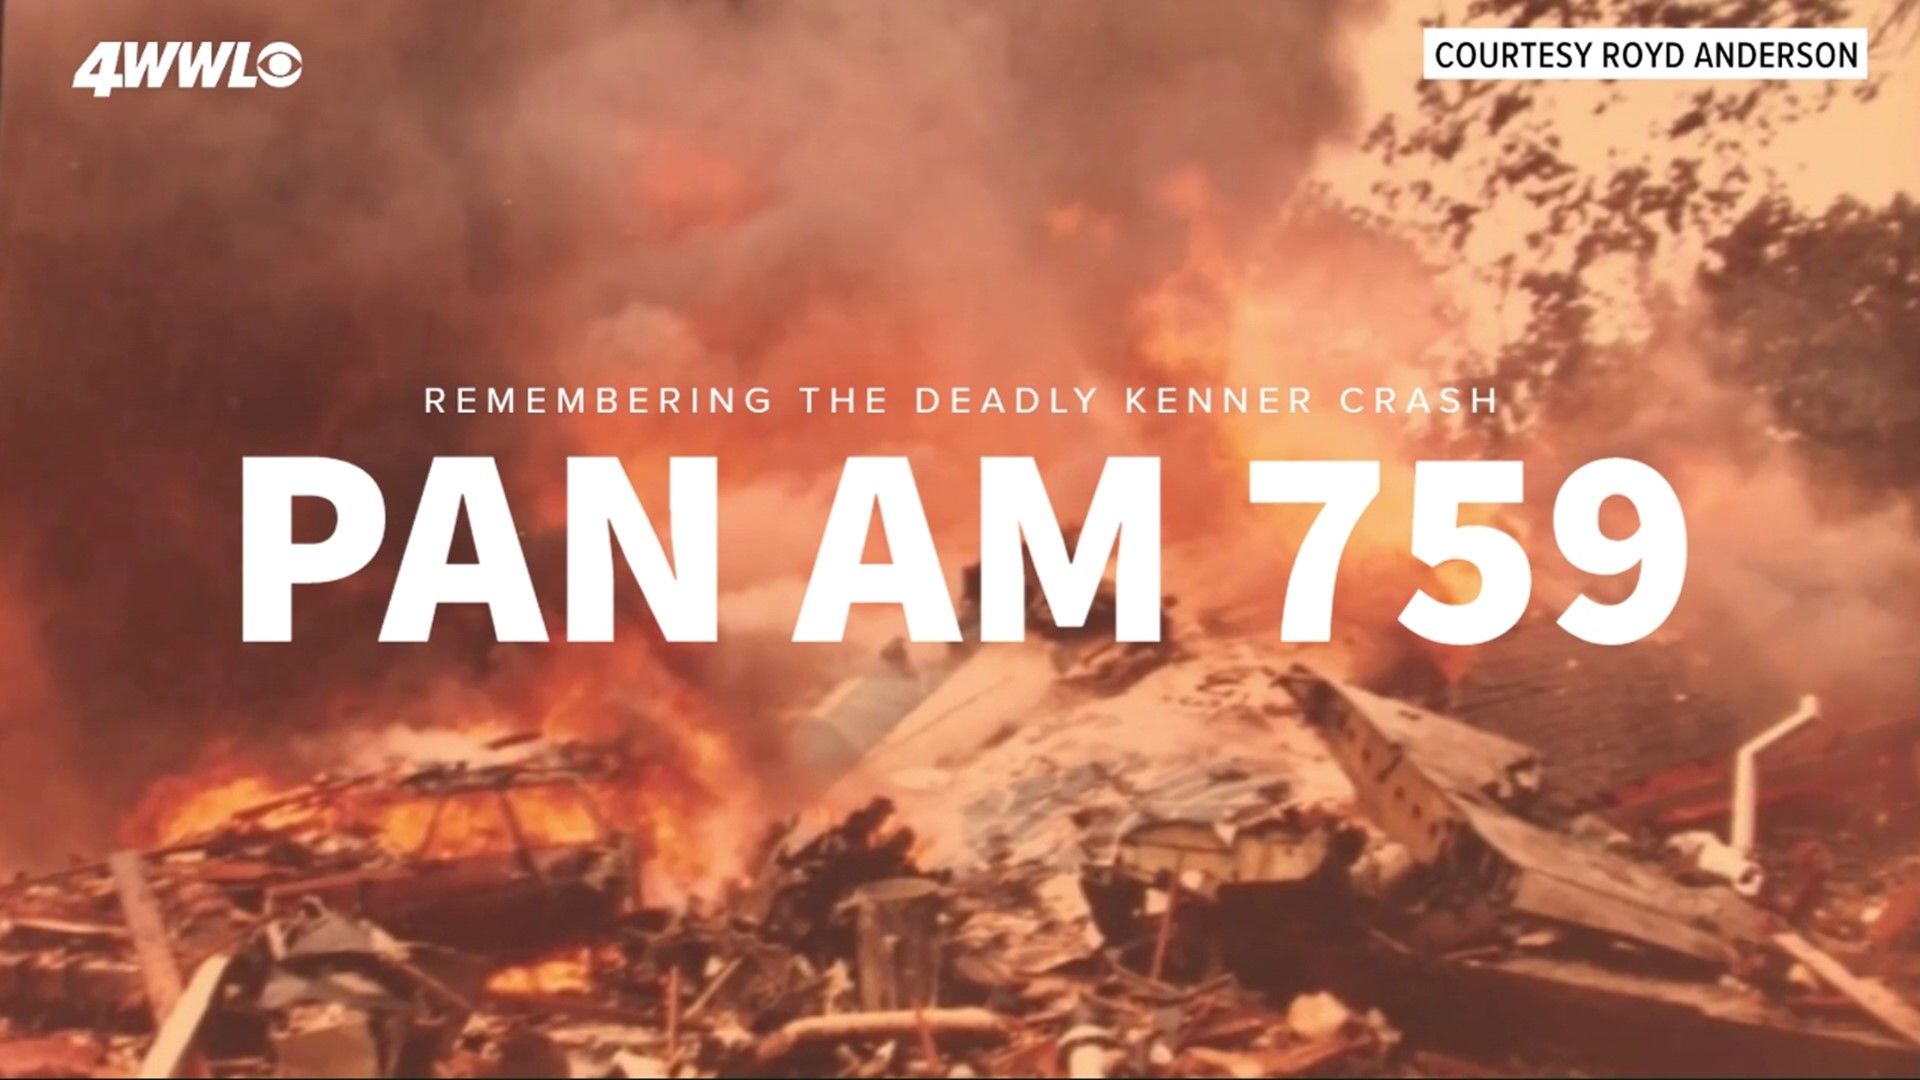 On July 9, 1982, Pan Am Flight 759 crashed in the New Orleans suburb of Kenner after being forced down by a microburst shortly after takeoff.